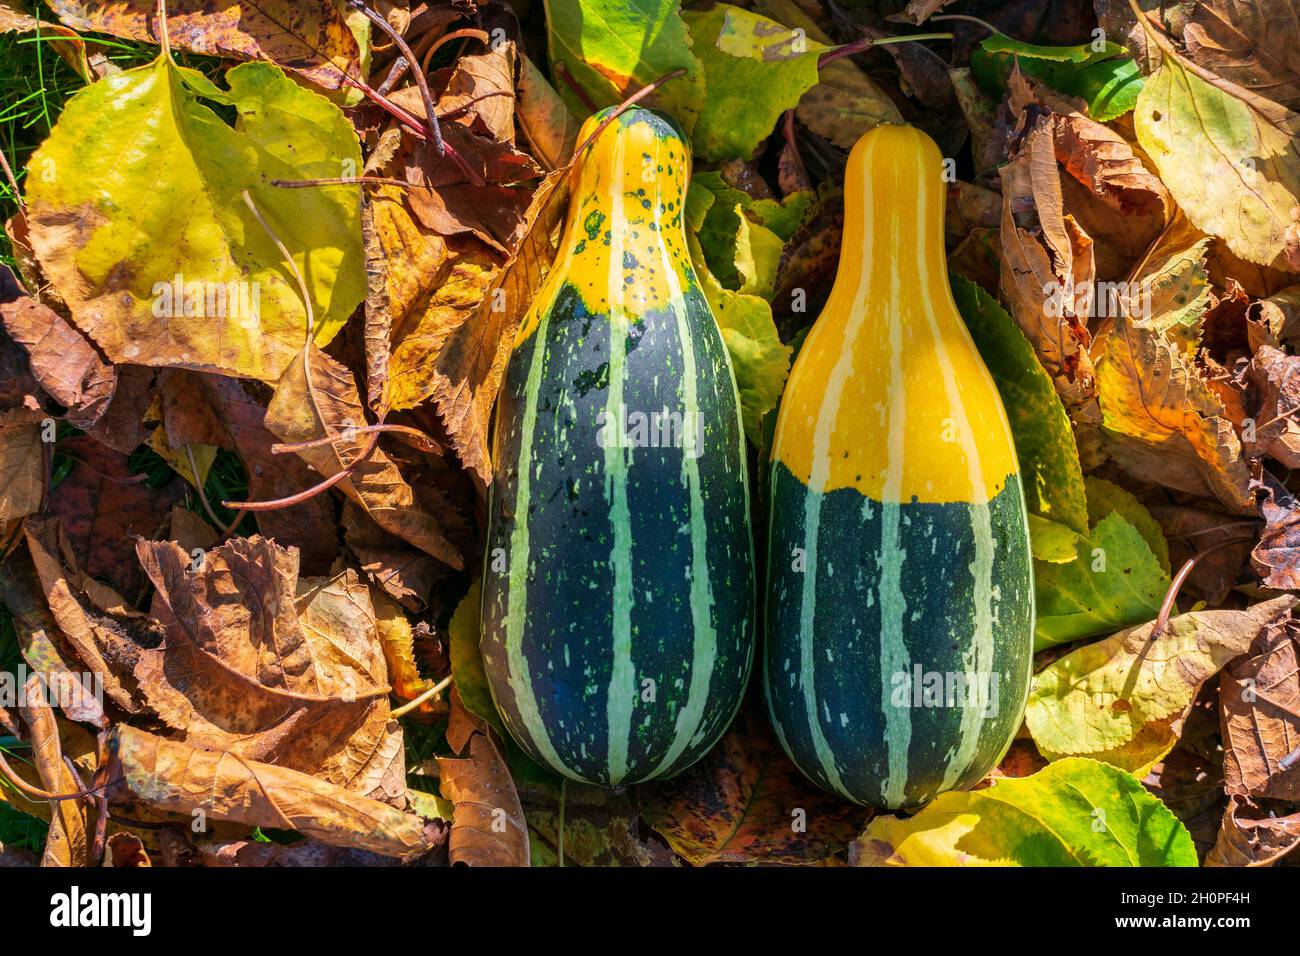 Long striped gourds or pumpkins among fall's colored leaves enlightened by sunset Stock Photo